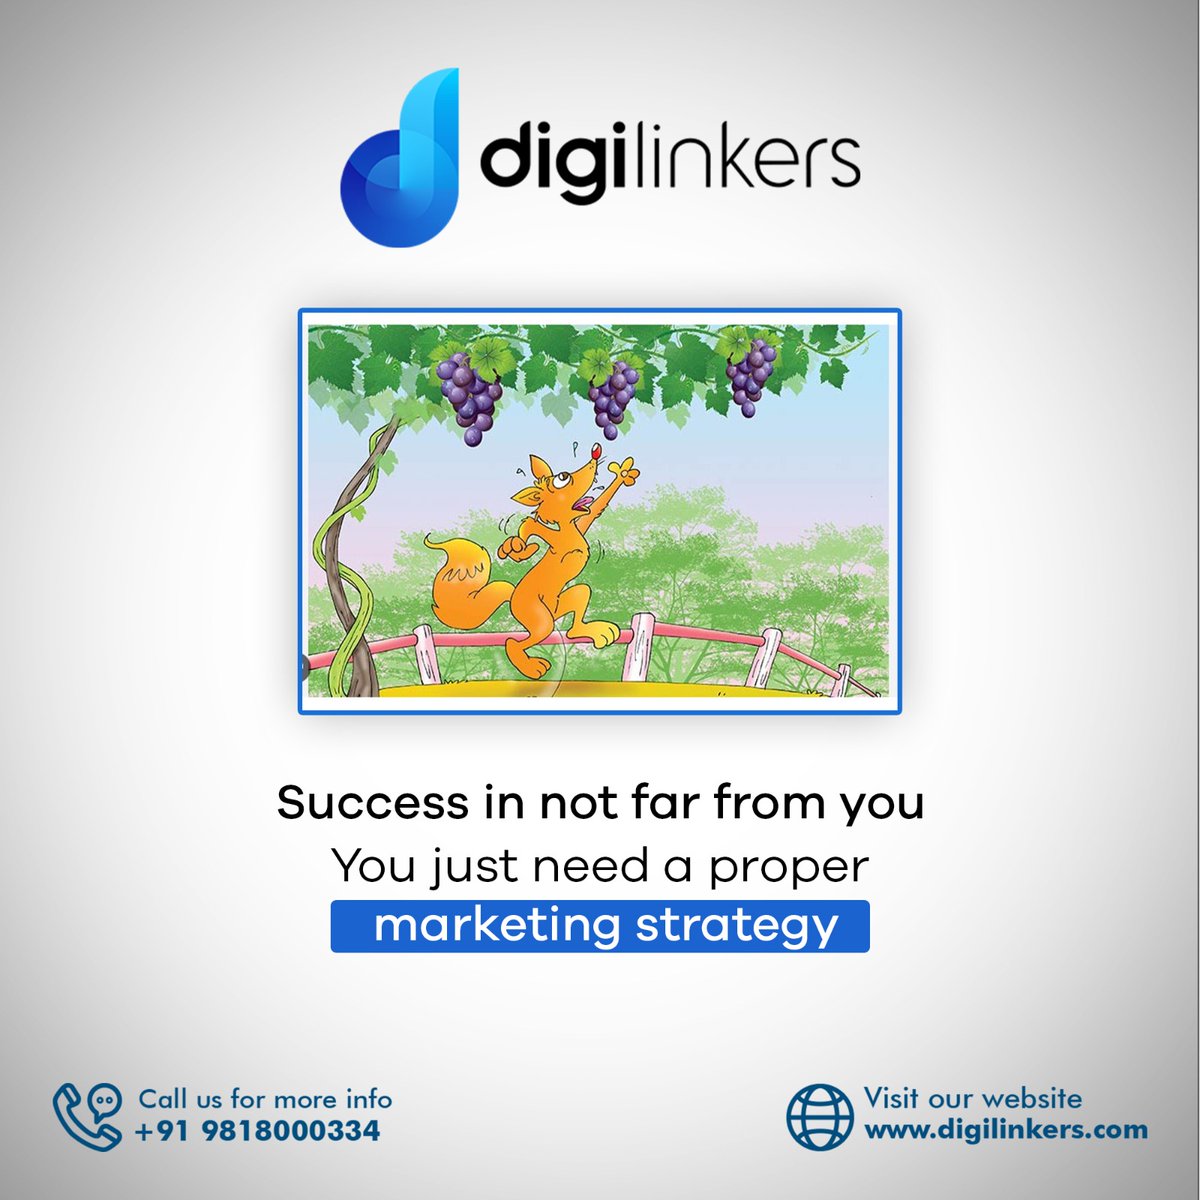 Unlocking success is a journey, and with our tailored digital marketing strategy, we pave the path for you to reach your goals. 

#Digilinkers #DigilinkersMarketing #TailoredMarketing #MarketingStrategy #DigitalSolutions #DigitalMarketingStrategy #MarketingAutomation